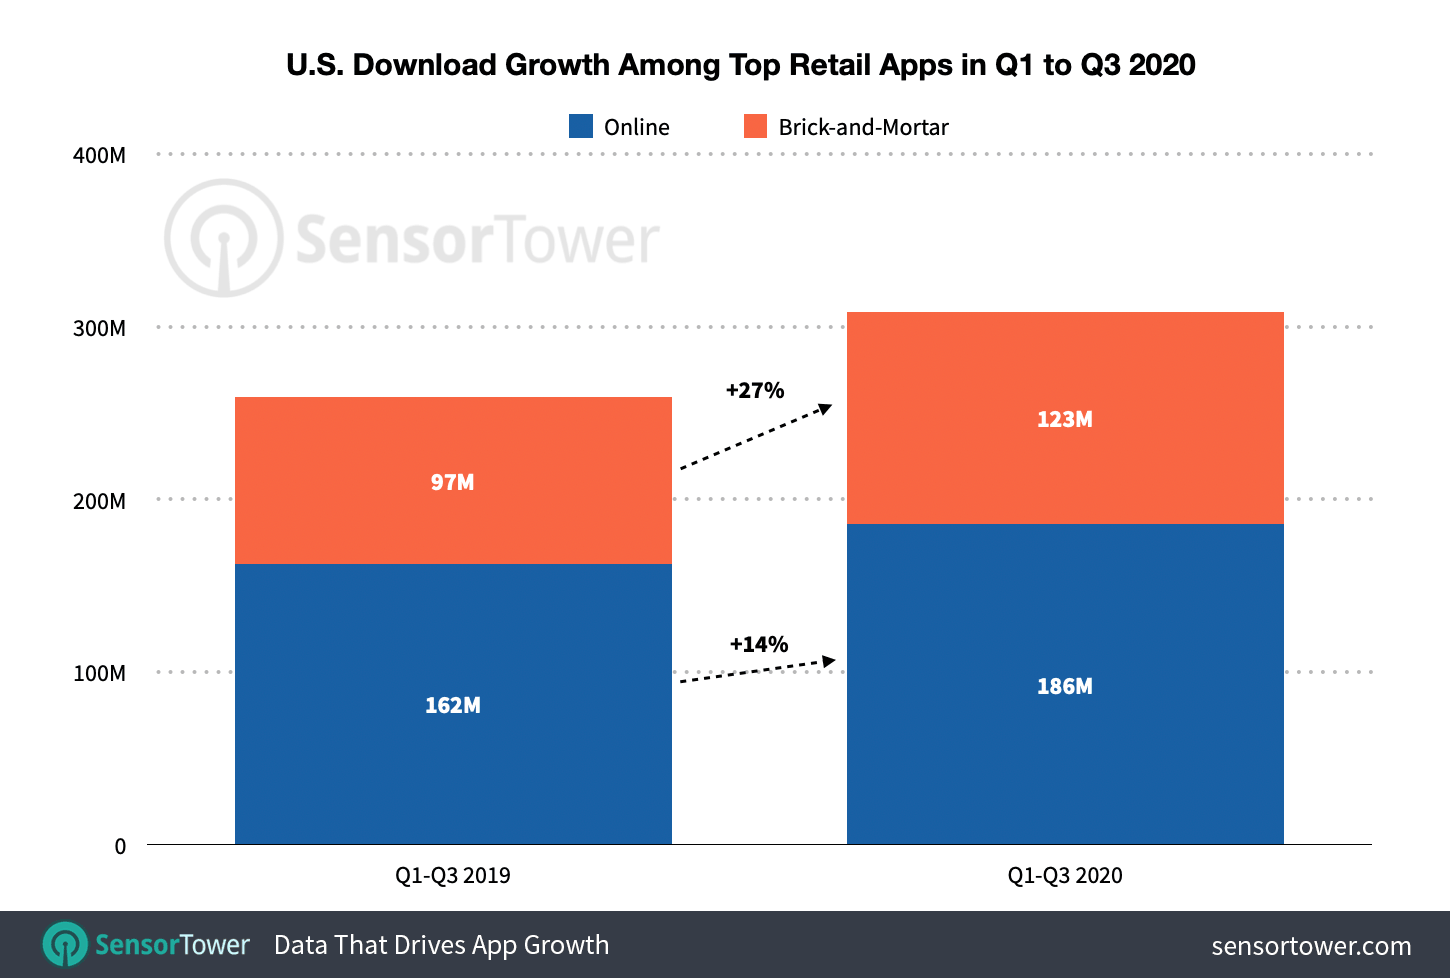 In the first three quarters of 2020, the top U.S. B&M apps grew 27% year-over-year, while online retail apps grew 14% year-over-year